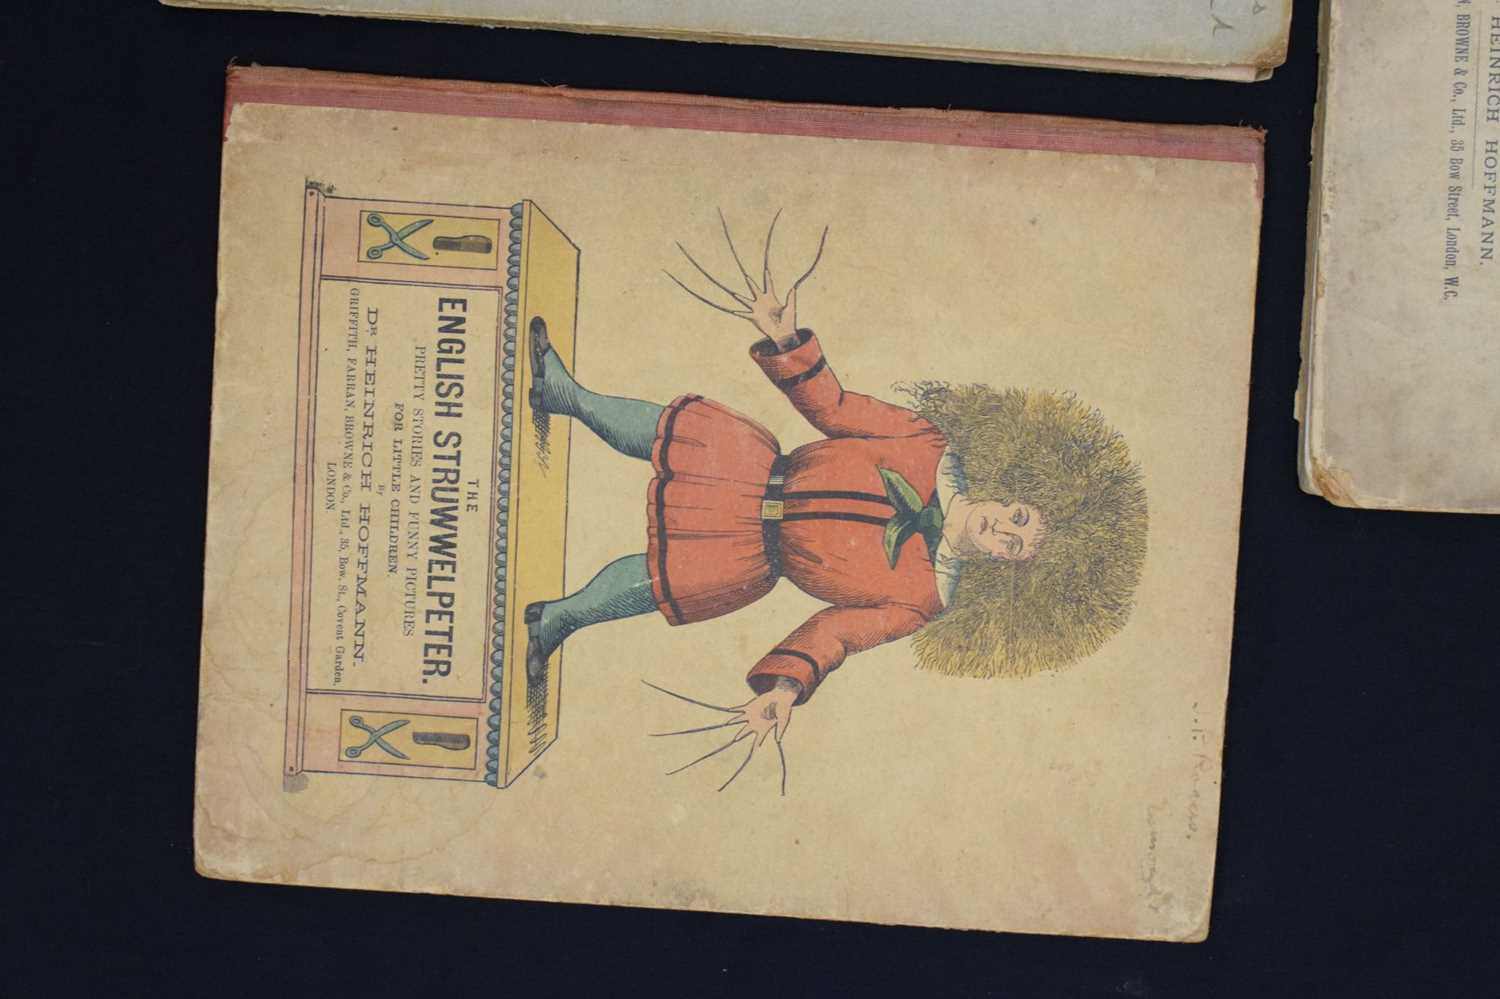 'Der Struwwelpeter' by Dr Heinrich Hoffman, German and English editions - Image 5 of 12